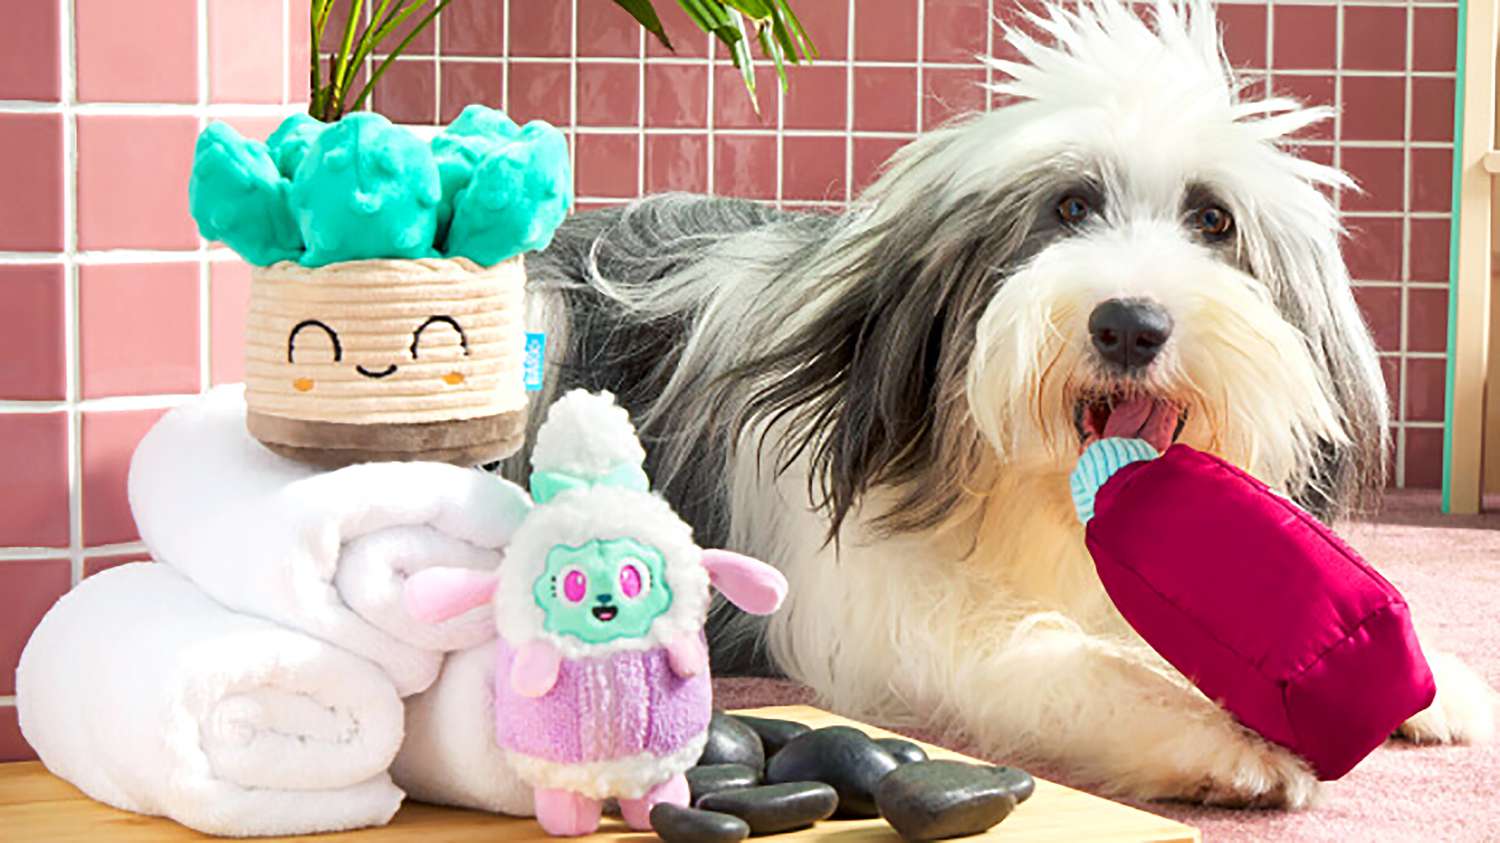 8 Best Dog Subscription Boxes for Treating Your Pup in 2021